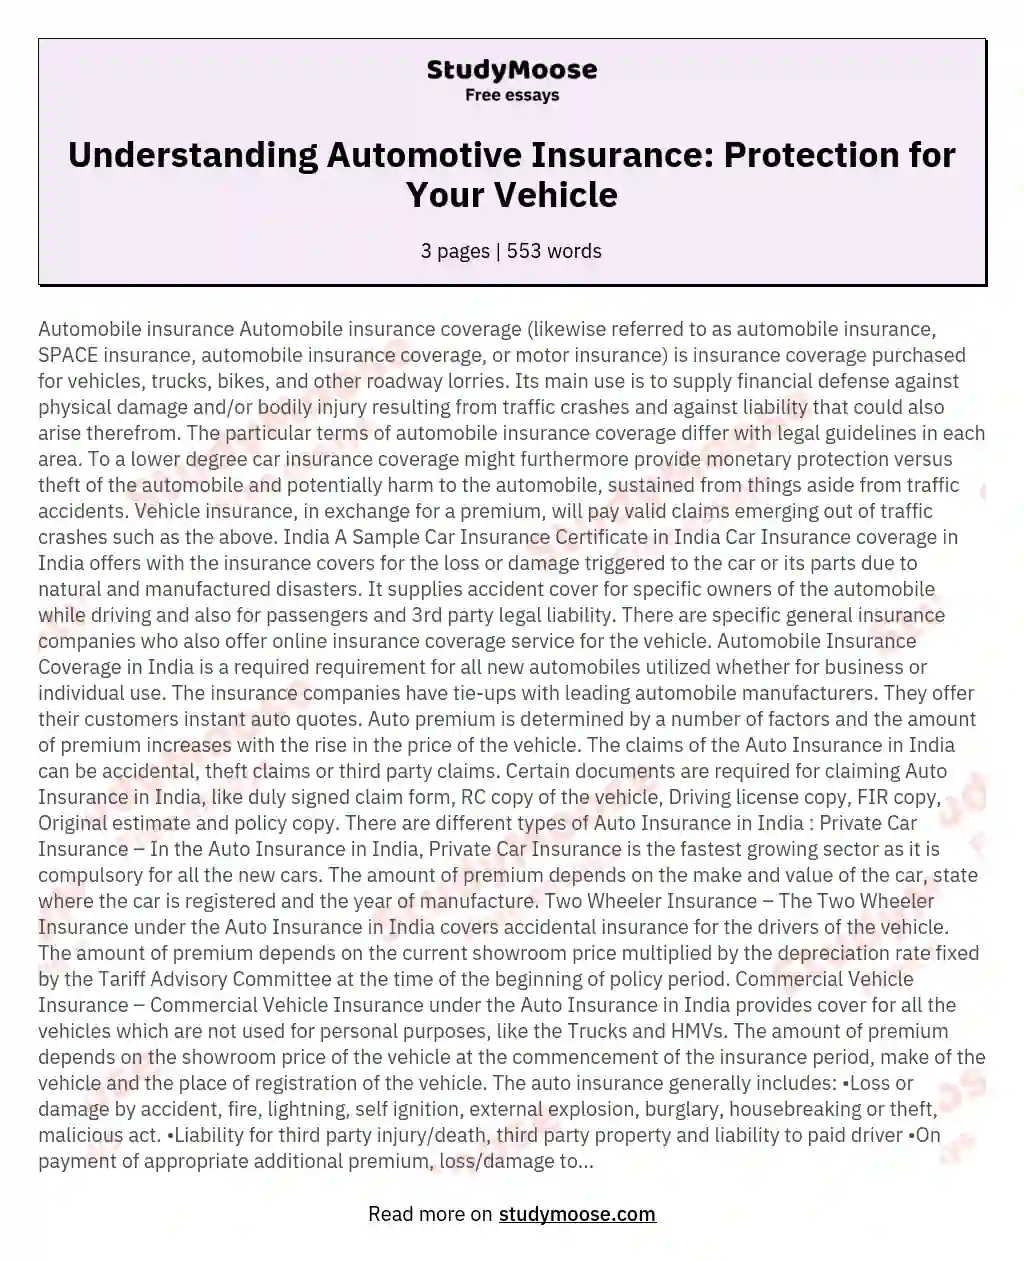 Understanding Automotive Insurance: Protection for Your Vehicle essay